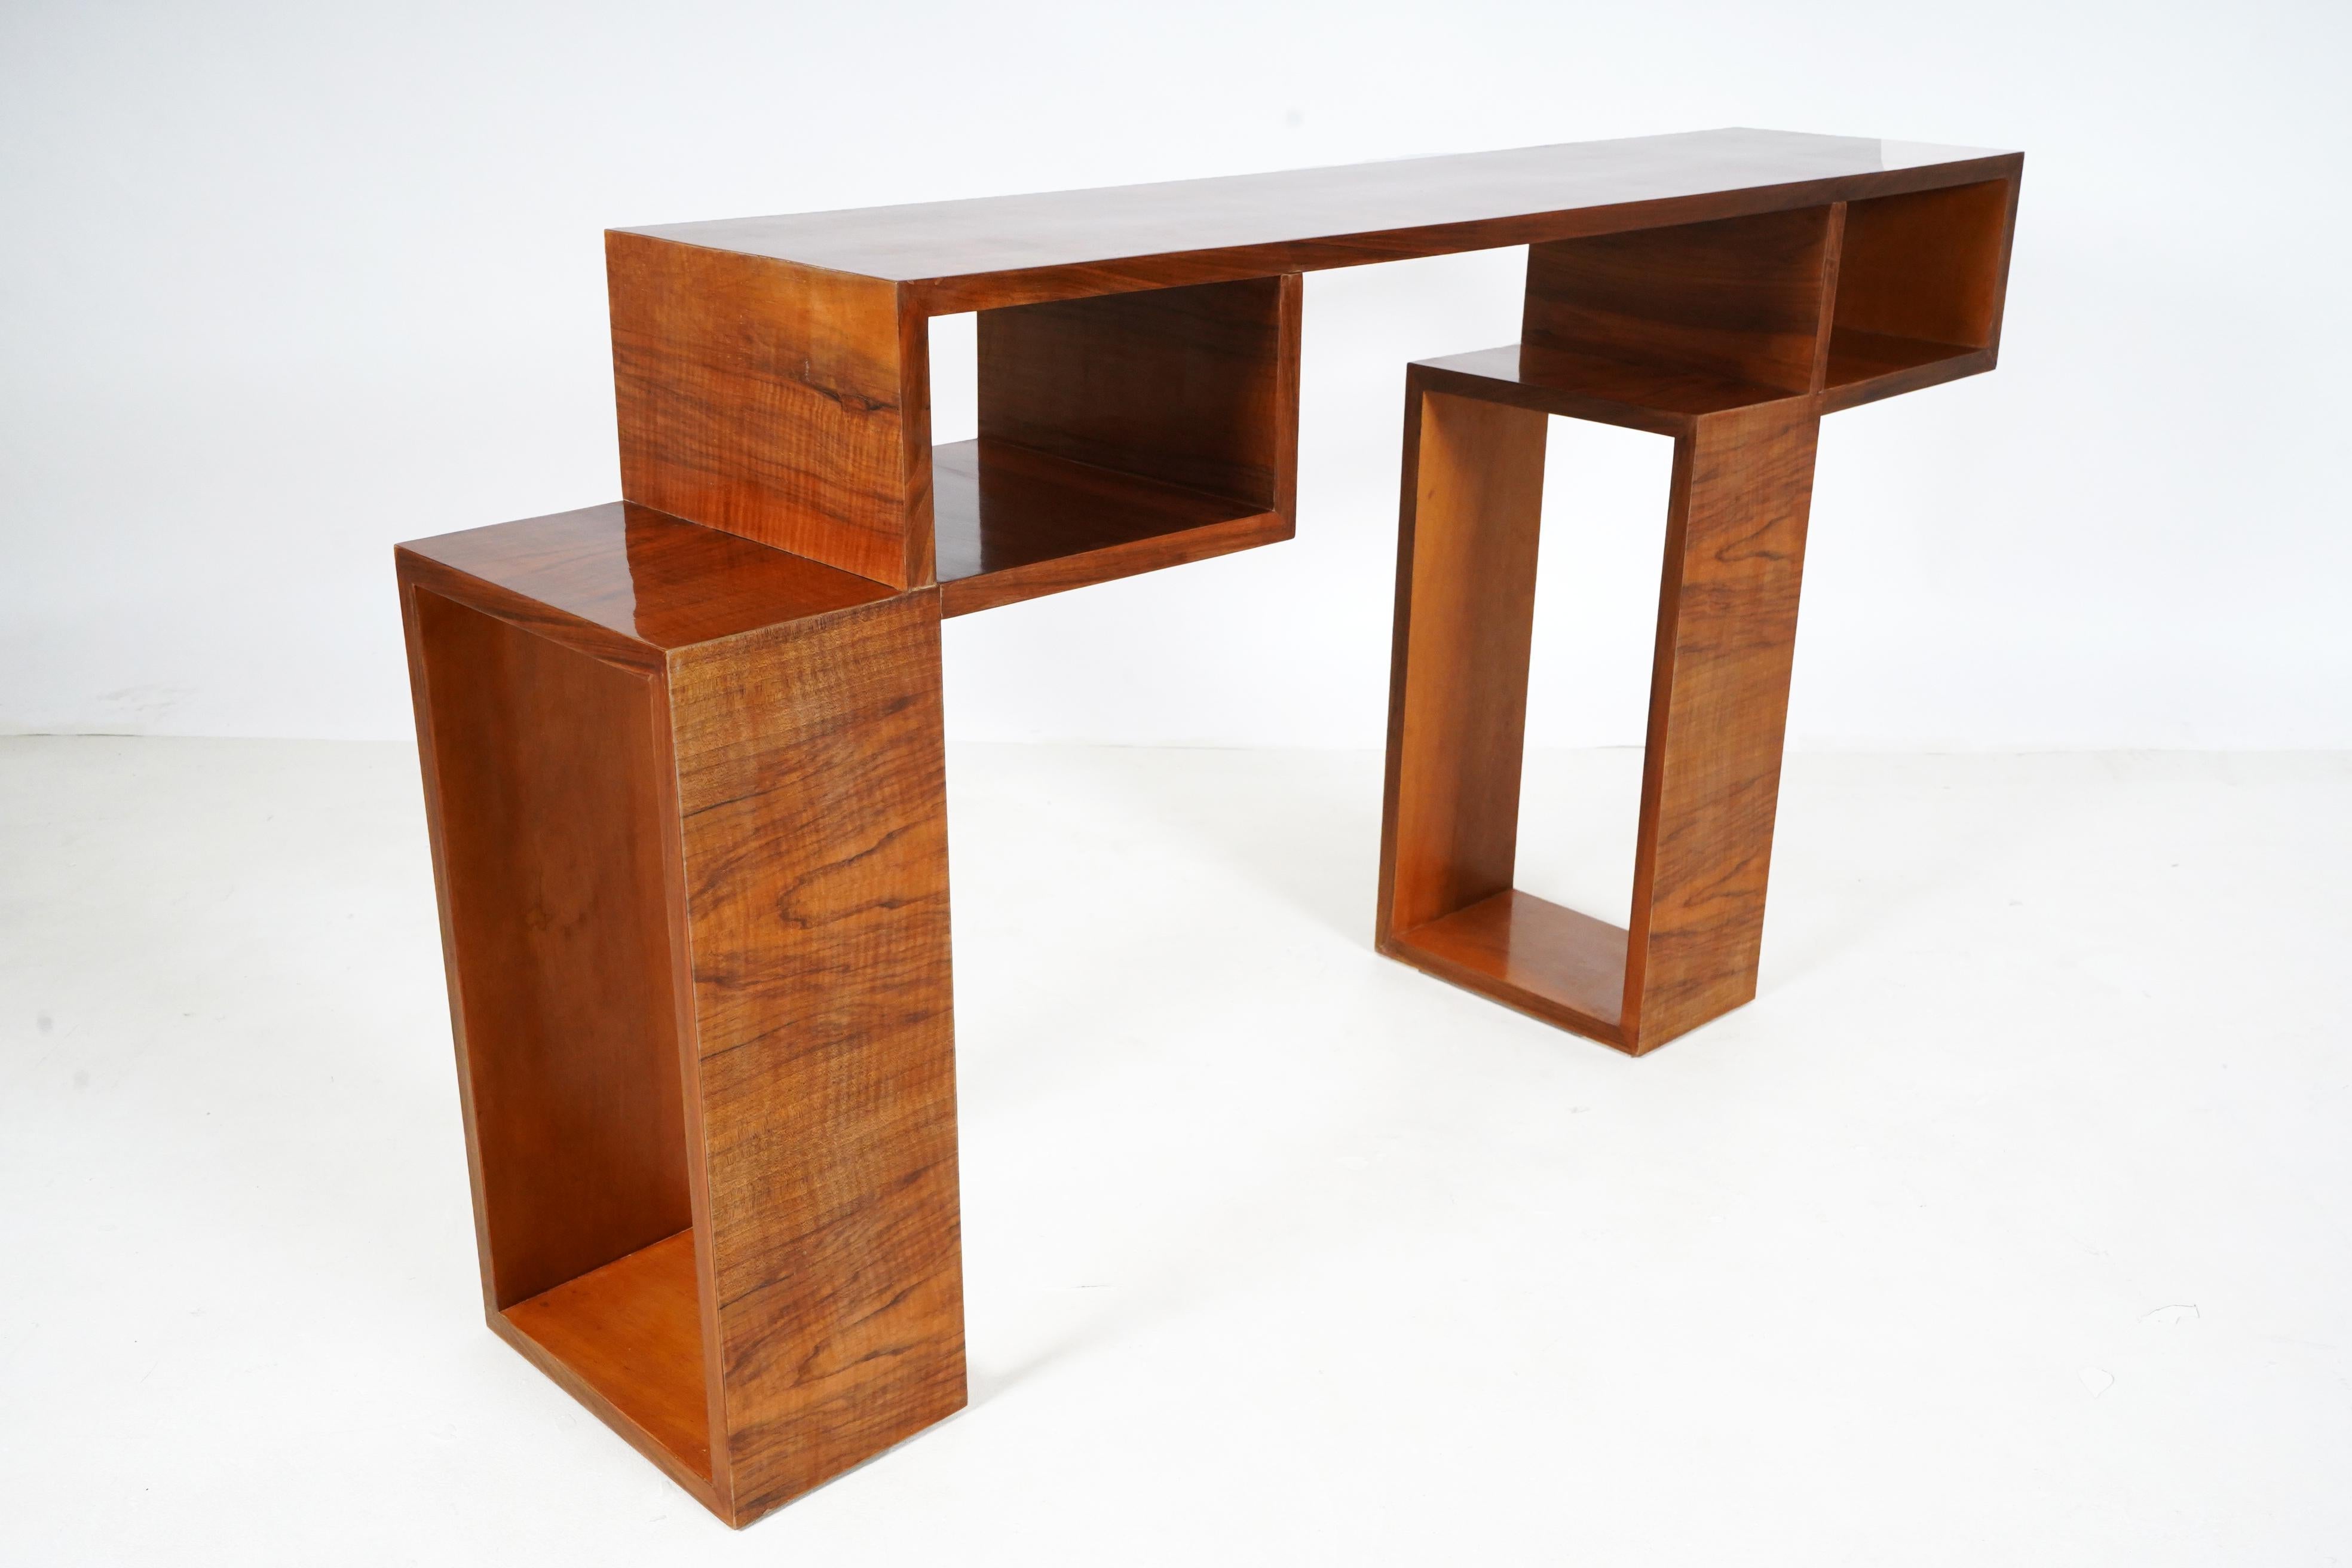 Walnut Veneer Cubist Console In Good Condition For Sale In Chicago, IL